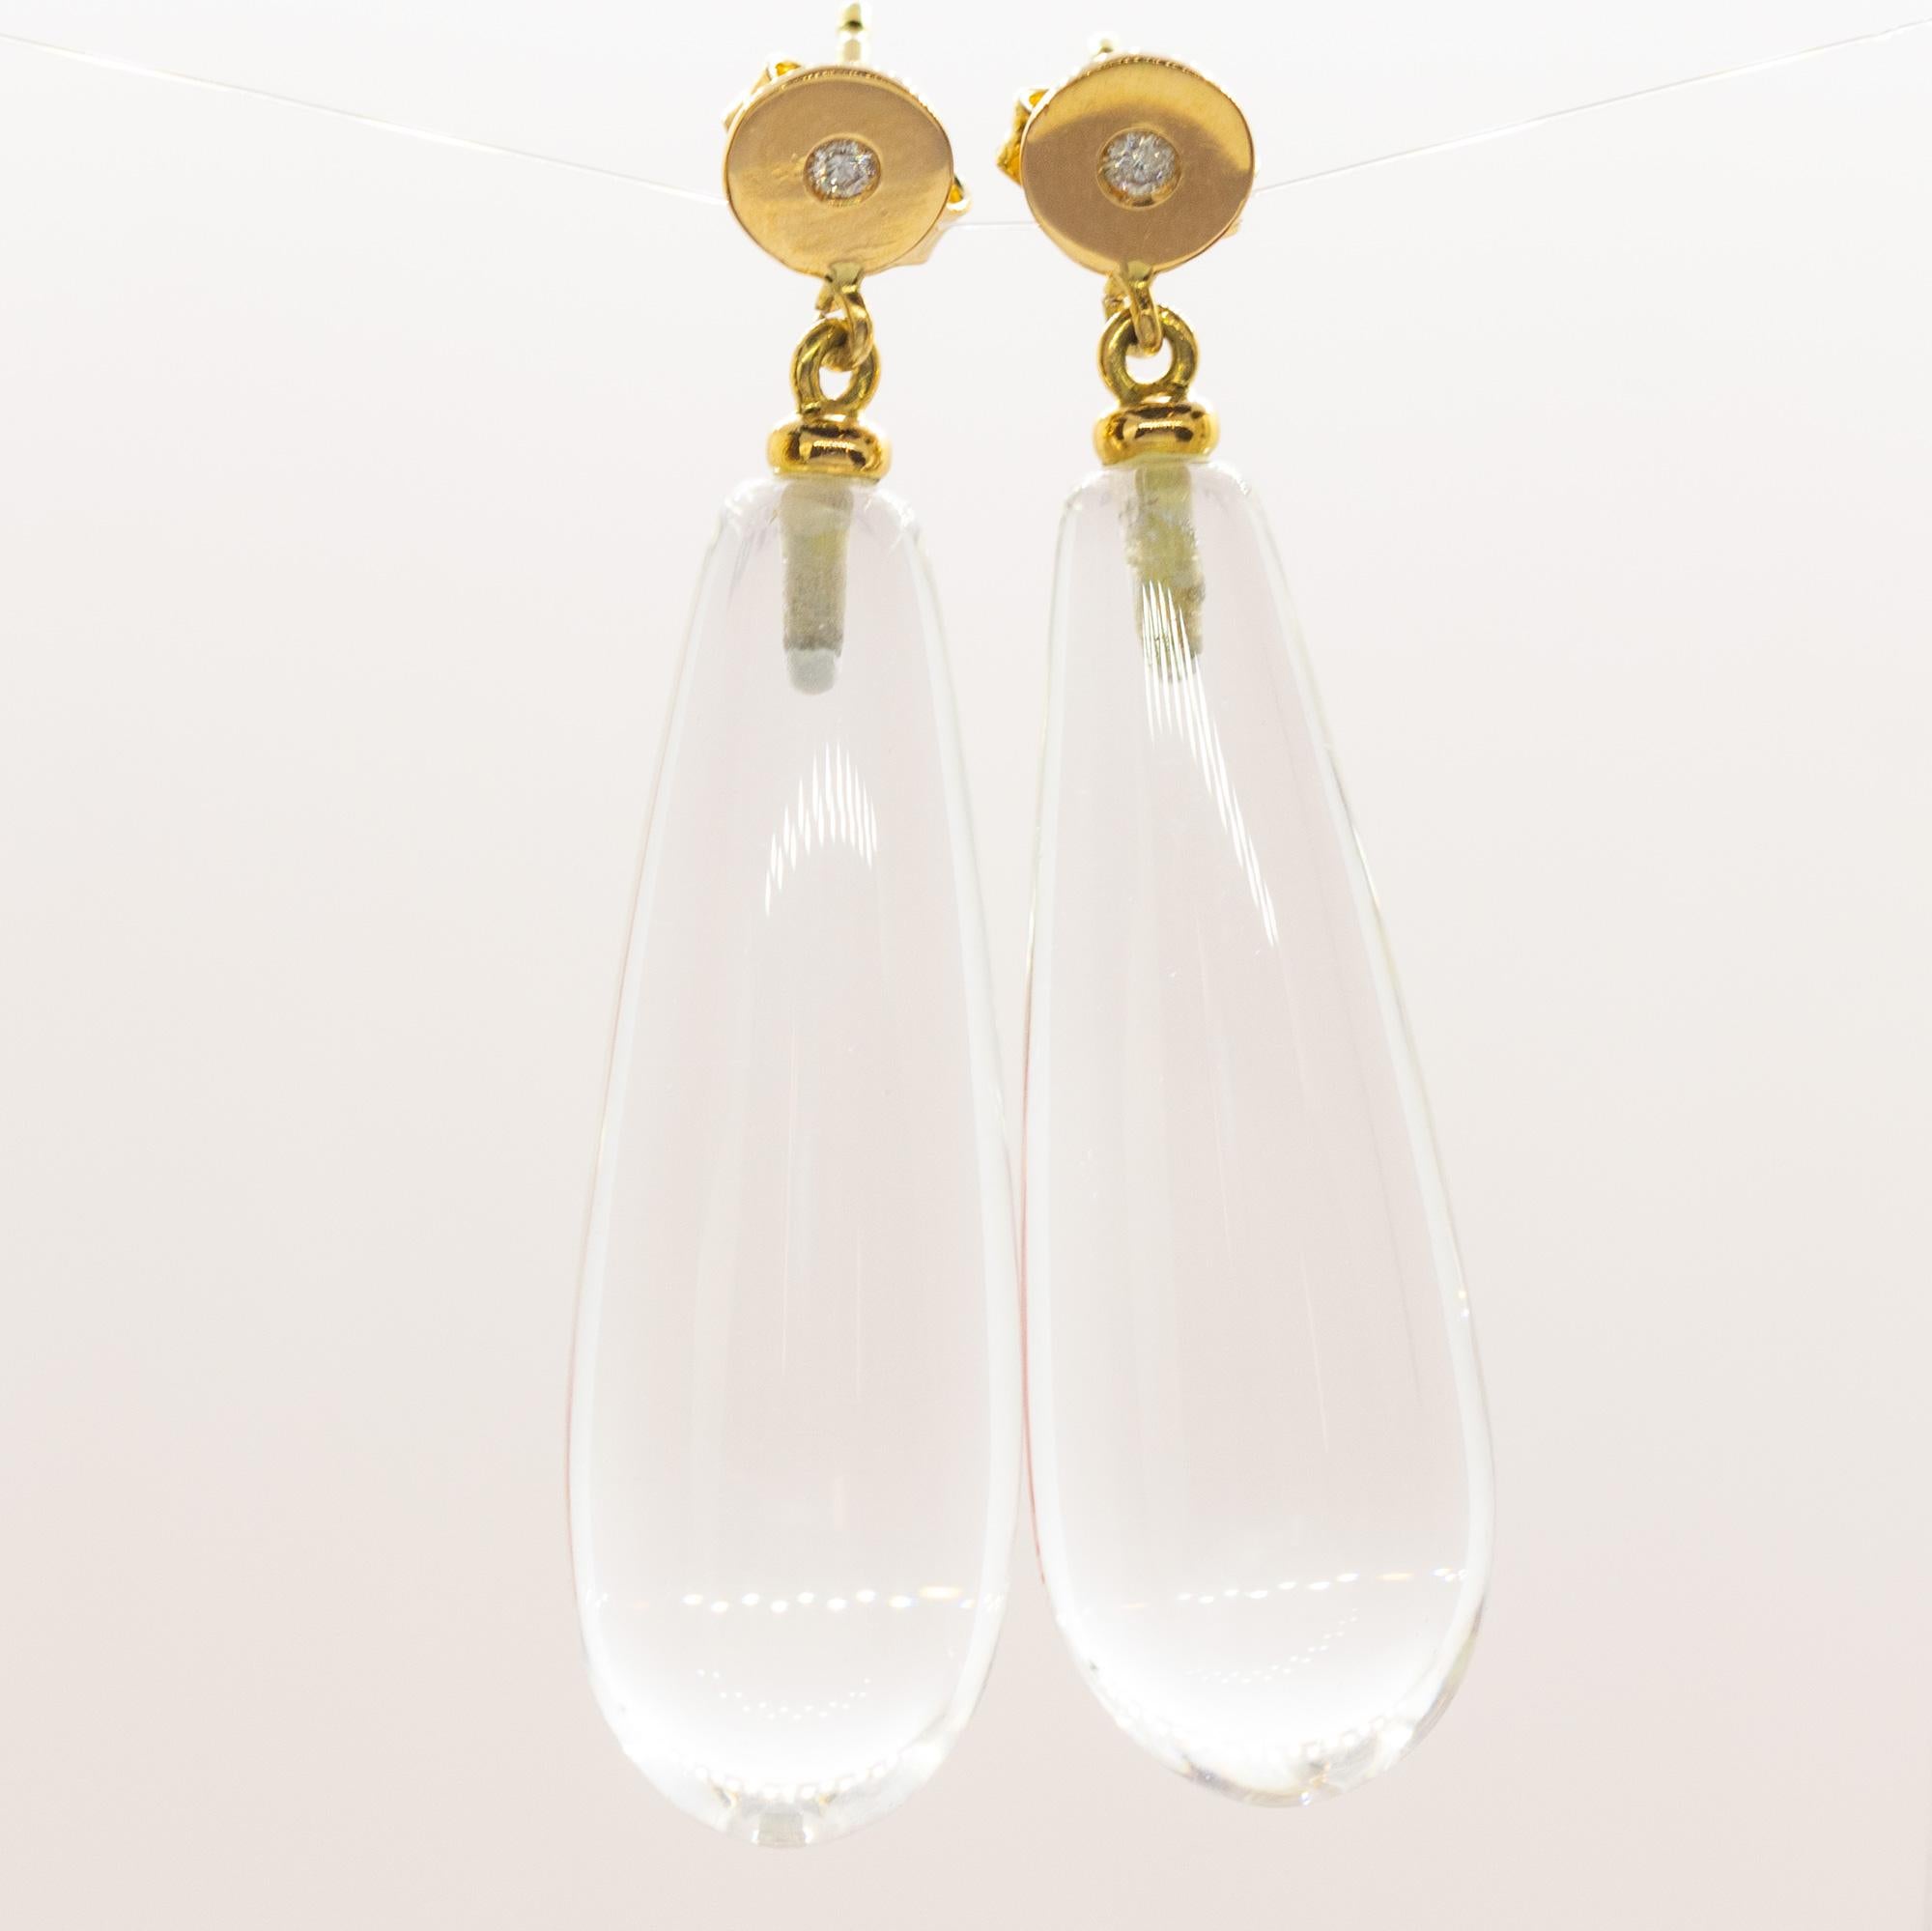 Italian handcarved earrings full of design and beauty. Marvellous rock crystal and diamonds dangle drop earrings. Decorated by precious 1.8 g 18 karat yellow gold. The perfect jewel for a summer day full of sun and smiles. Teardrop, dangle and